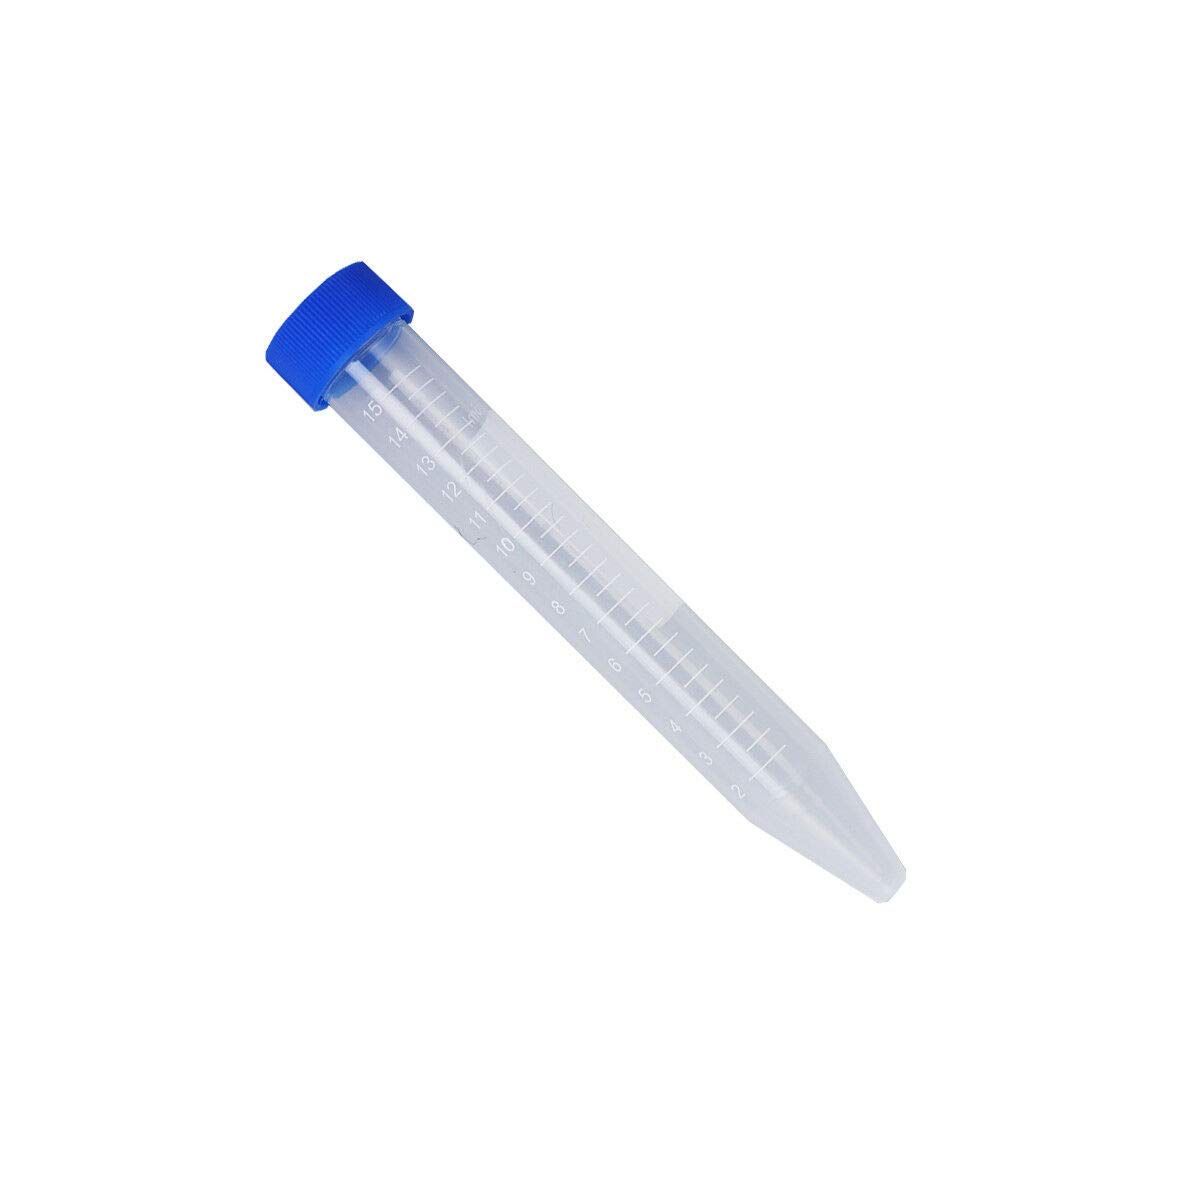 CENTRIFUGE TUBE, 15ML, CONICAL BOTTOM WITH SCREW CAP, STERILE (HP10042) (10 PCS/PACK)